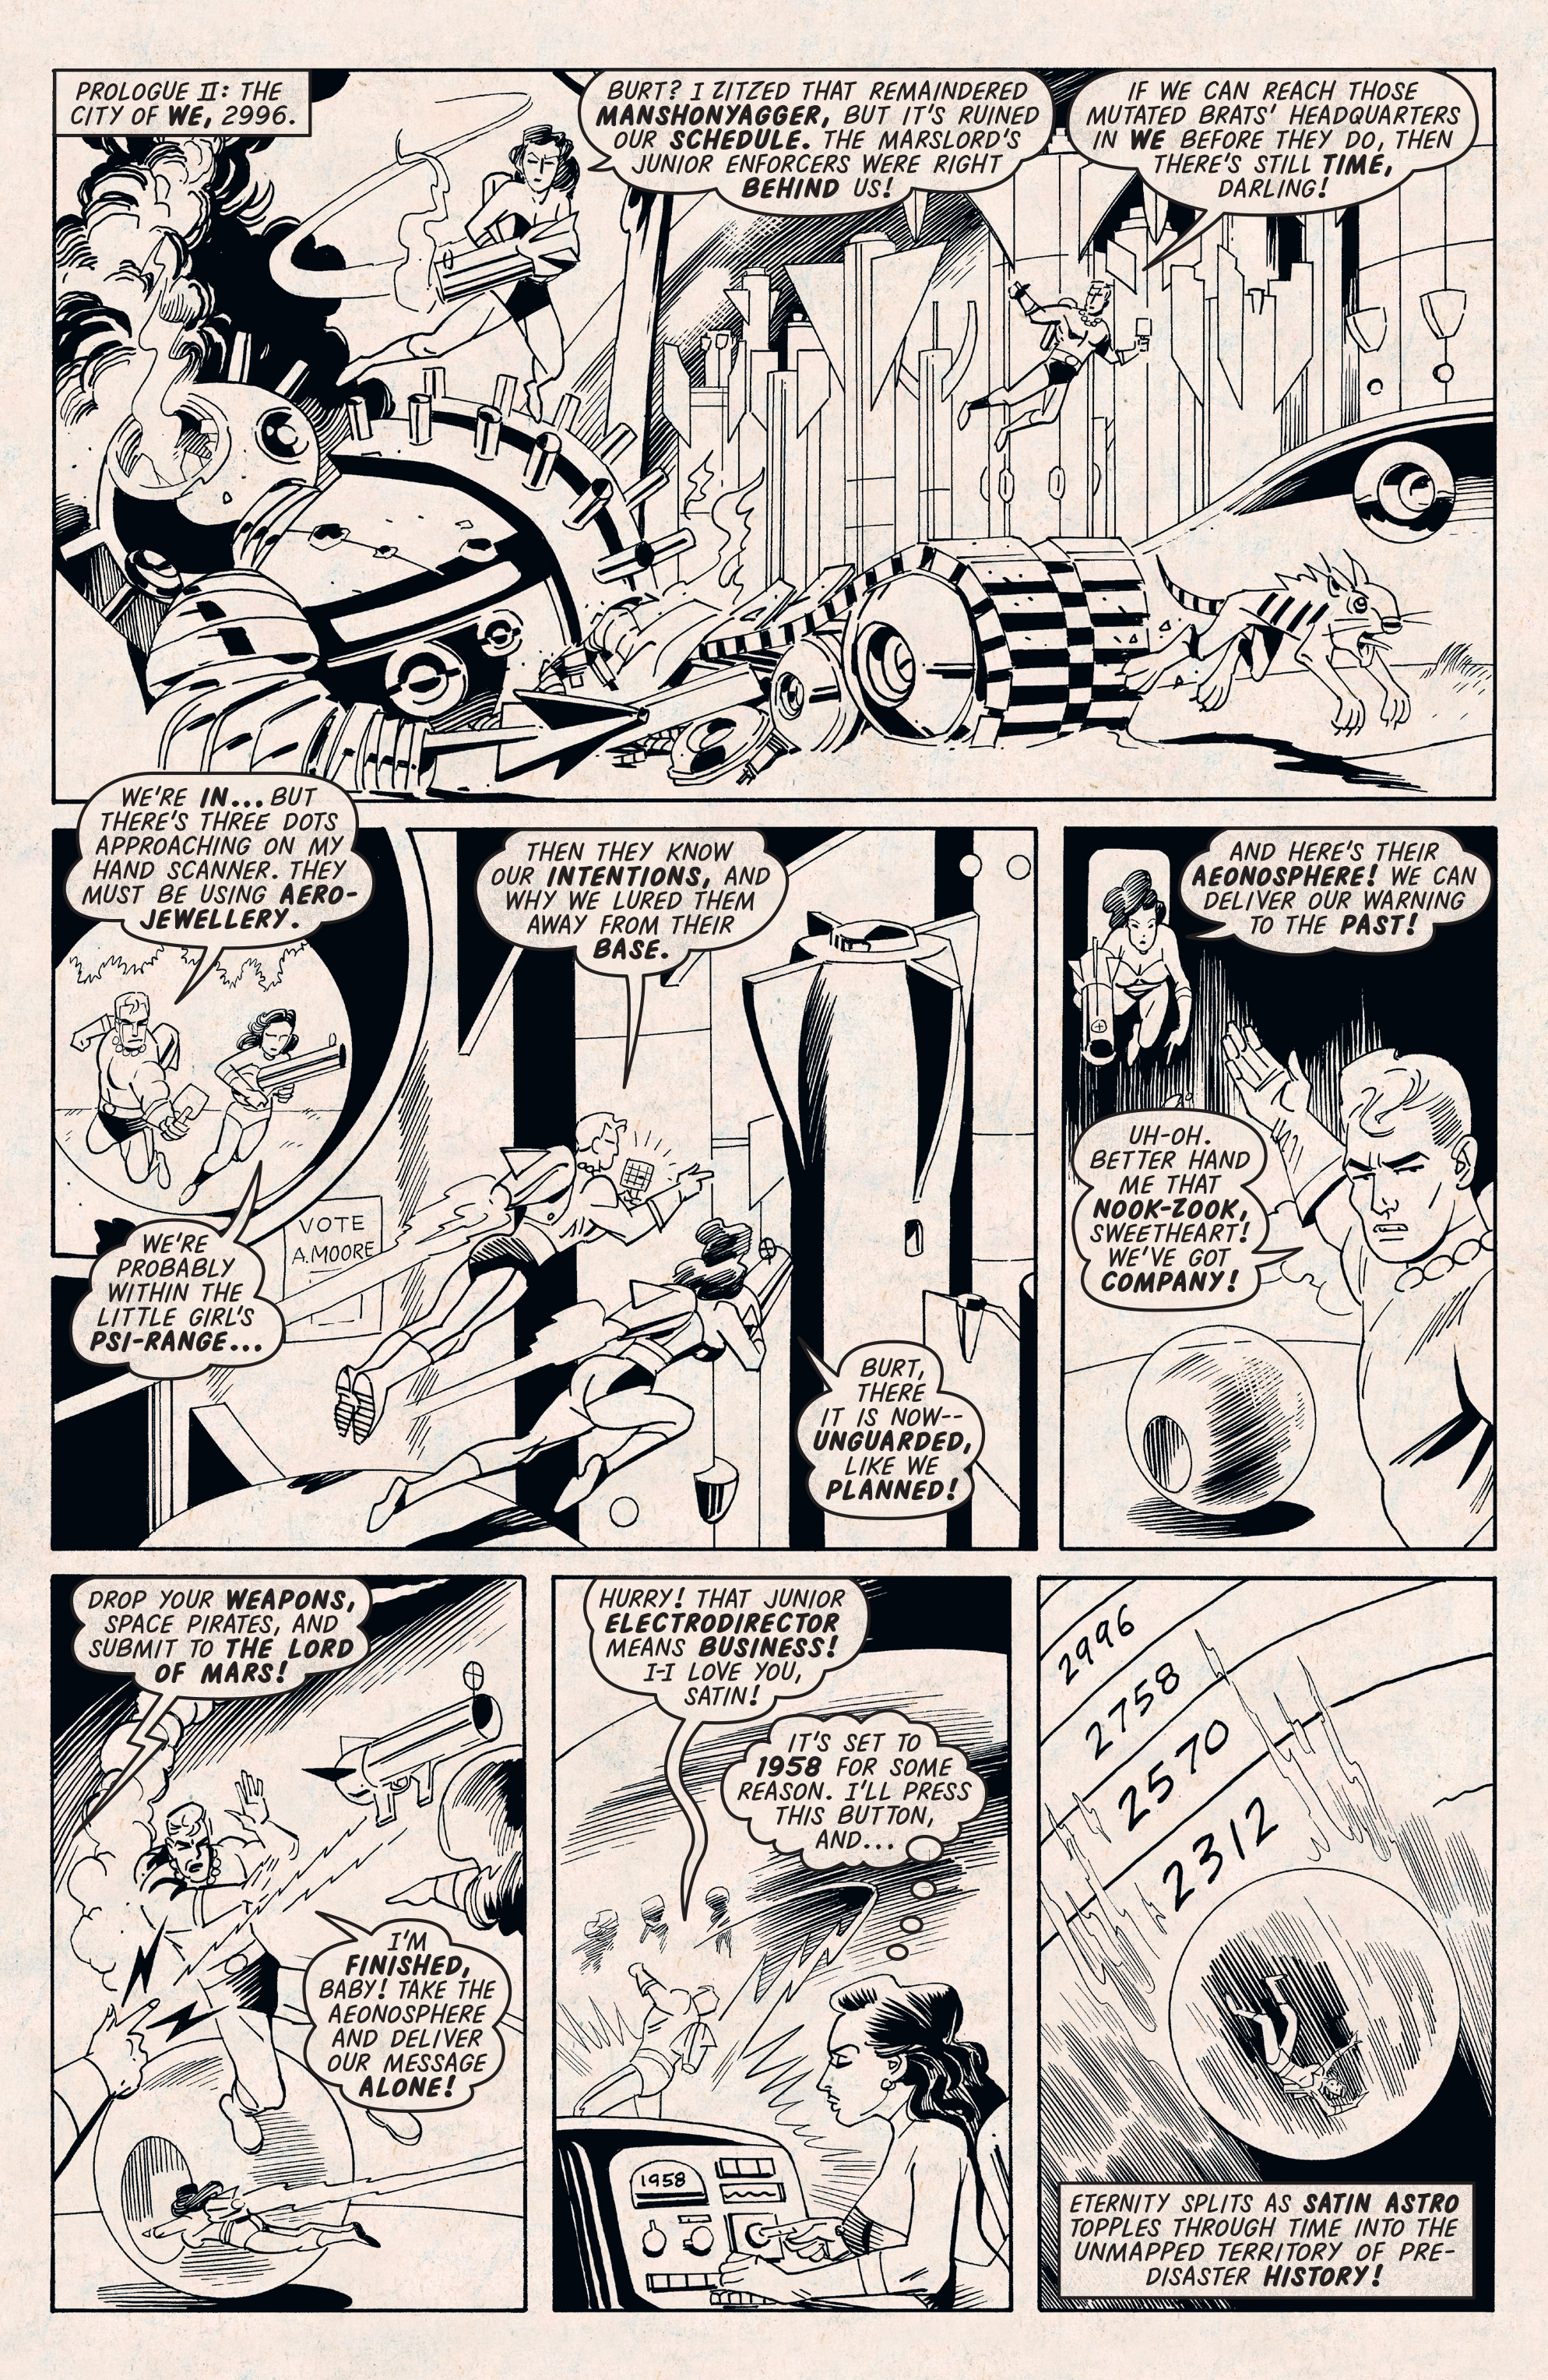 The League of Extraordinary Gentlemen: The Tempest (2018-): Chapter 1 - Page 4